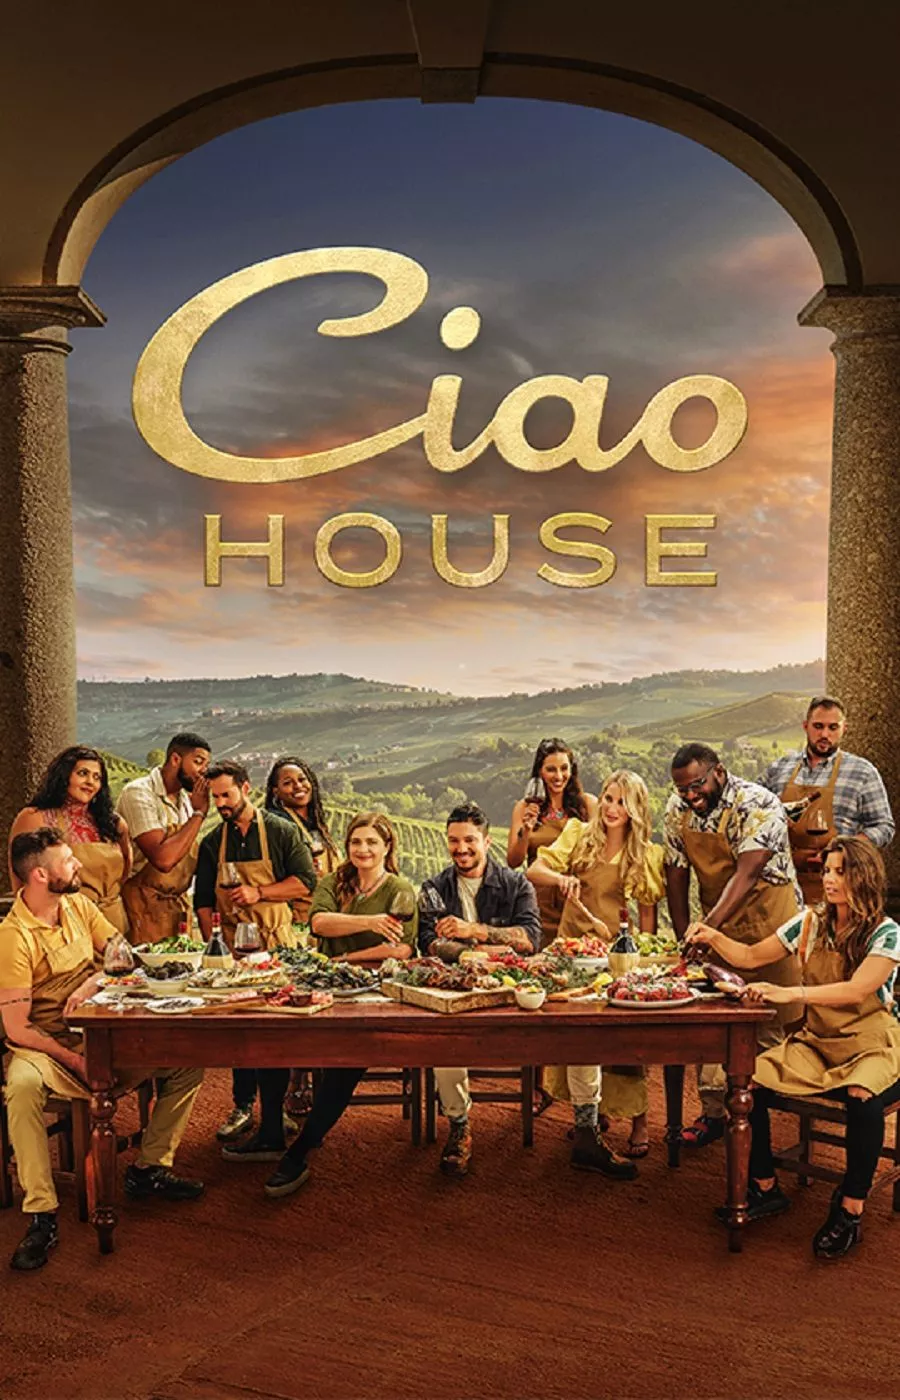 Ciao House Trailer | Food Network Canada